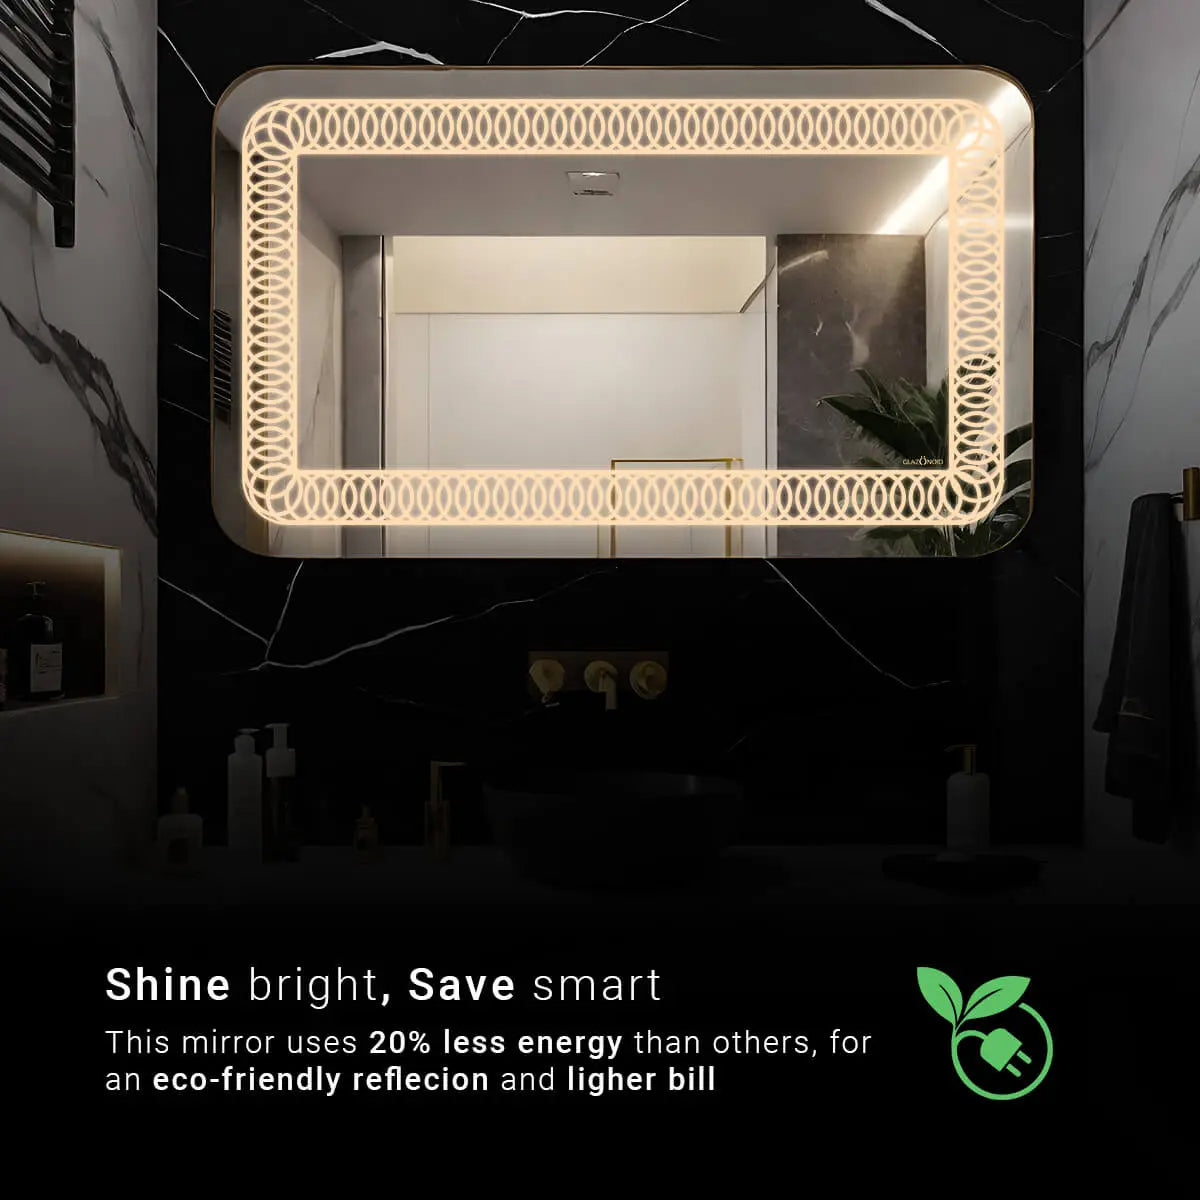 Energy-efficient lighted bathroom LED mirror. This mirror reduces energy consumption by 20% compared to conventional mirrors. This eco-conscious mirror is kind to the environment and your wallet.